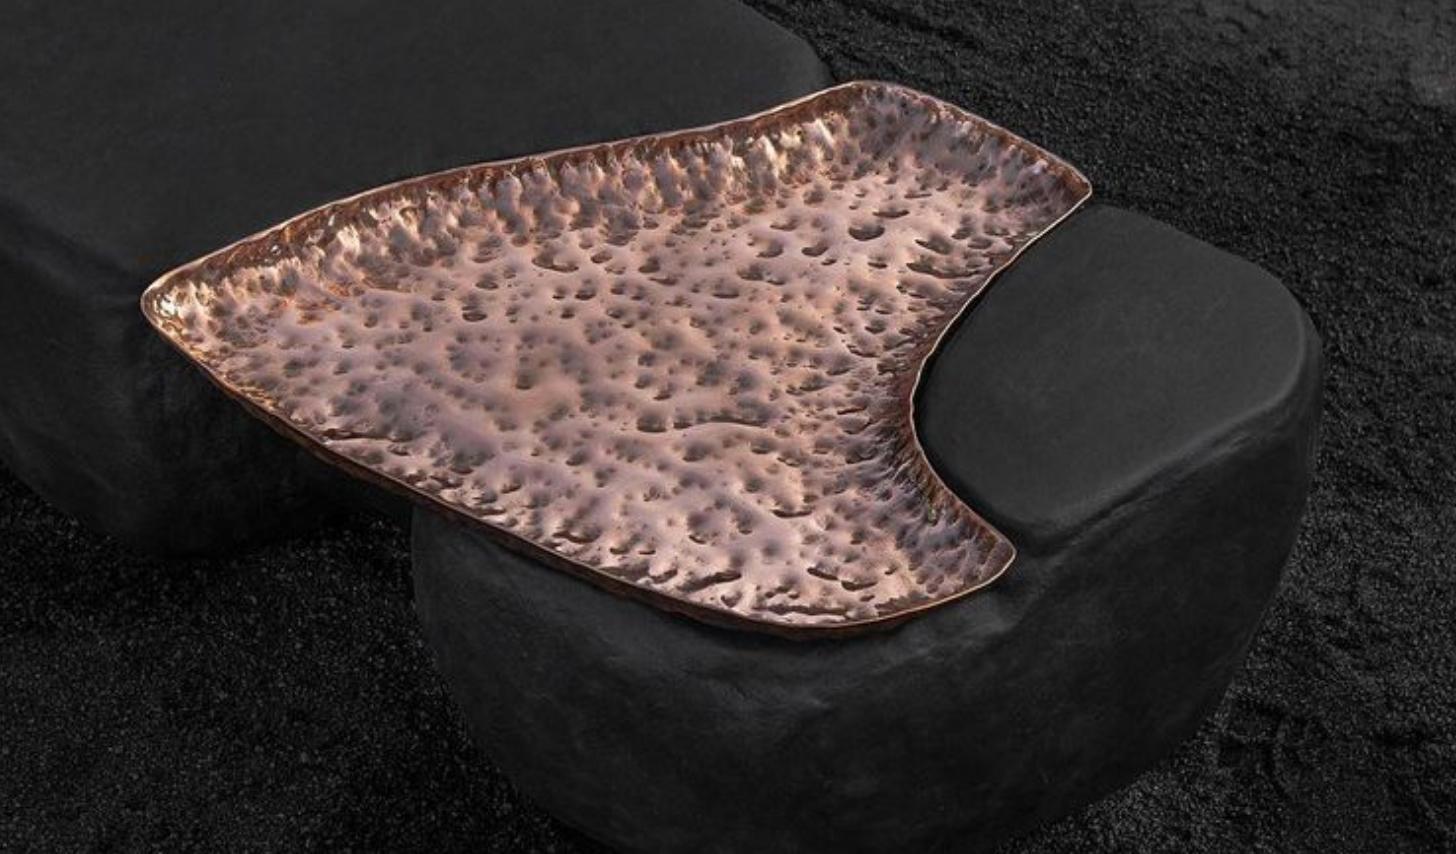 TC coffee table 1 by Studio ThusThat
Unique piece.
Dimensions: 30cm x 105cm x 54cm
Materials: Hand-formed slag geopolymer, hammered copper, brass fitting.

Studio ThusThat is a design practice whose work seeks to unearth the full potential of